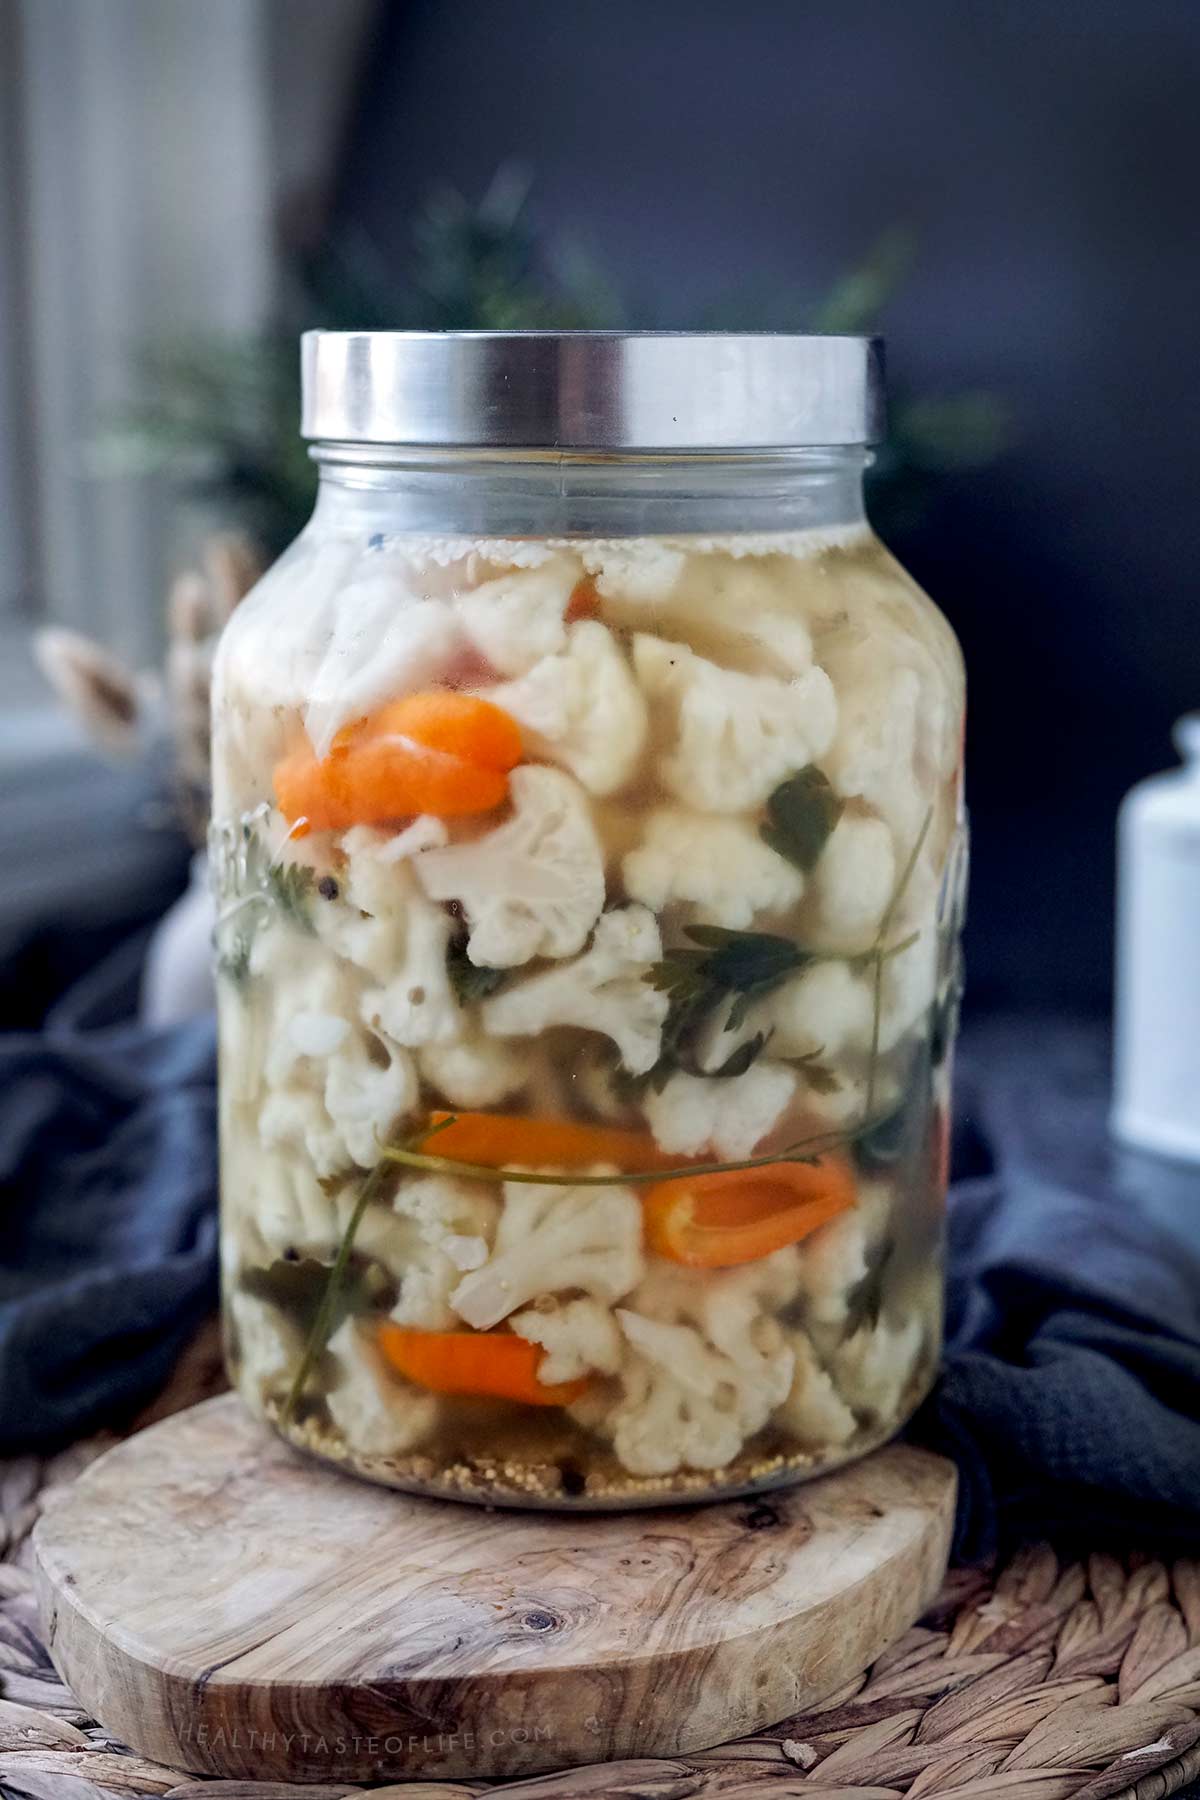 The same jar with fermented cauliflower after 3 weeks in the refrigerator showing how it should look once fermented.